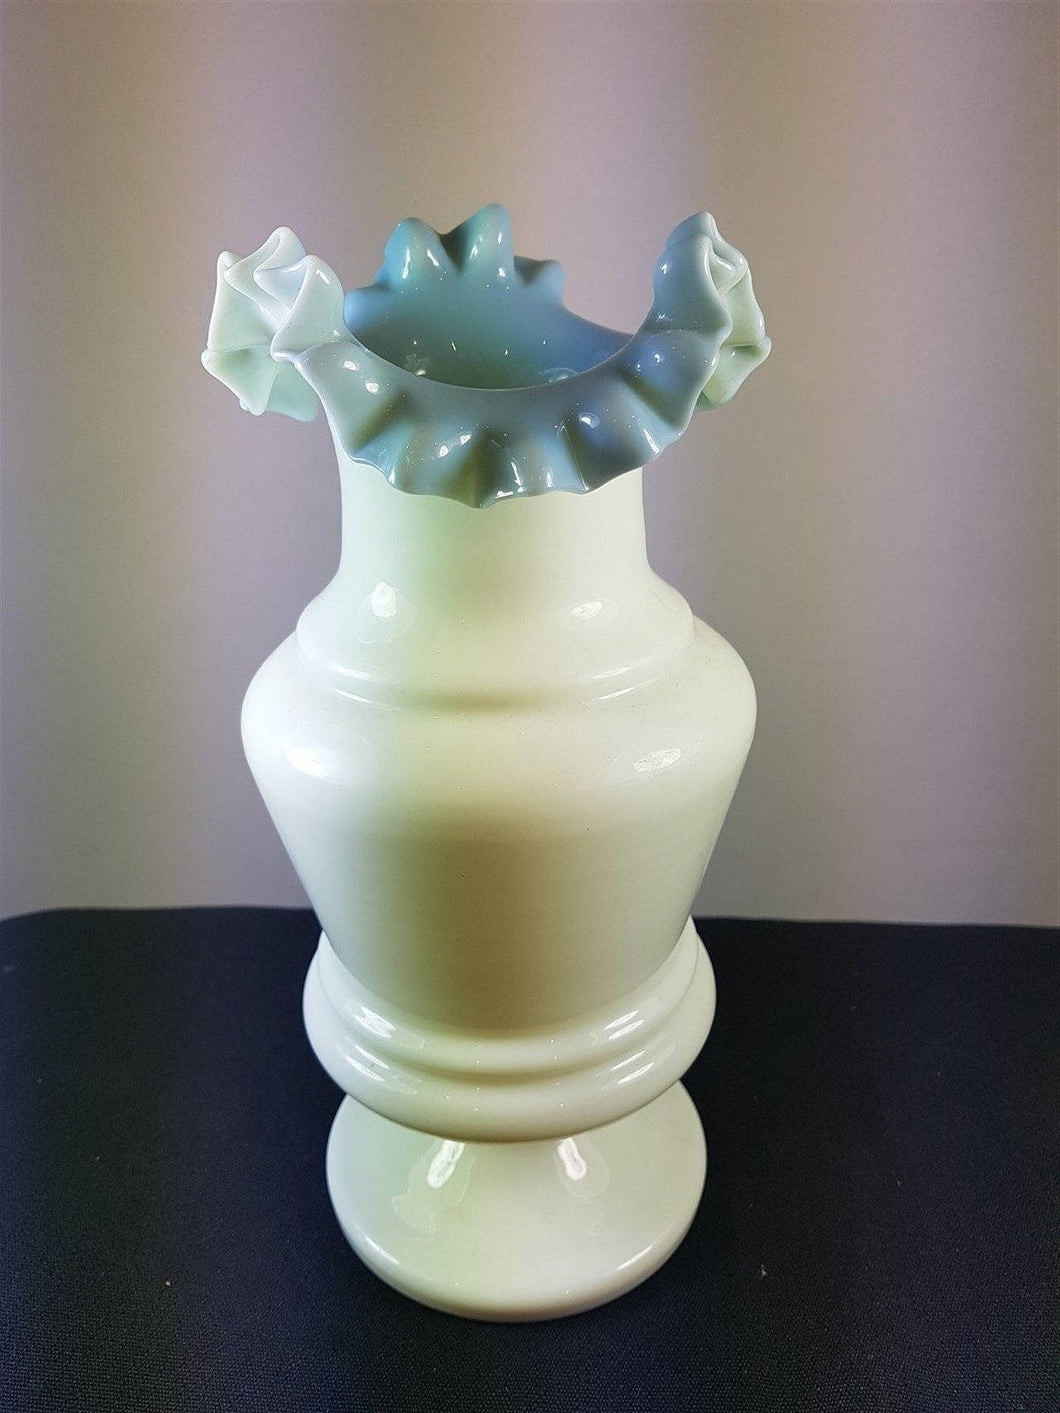 Antique Blue and White Milk Glass Flower Vase Hand Blown Glass Late 1800's - Early 1900's